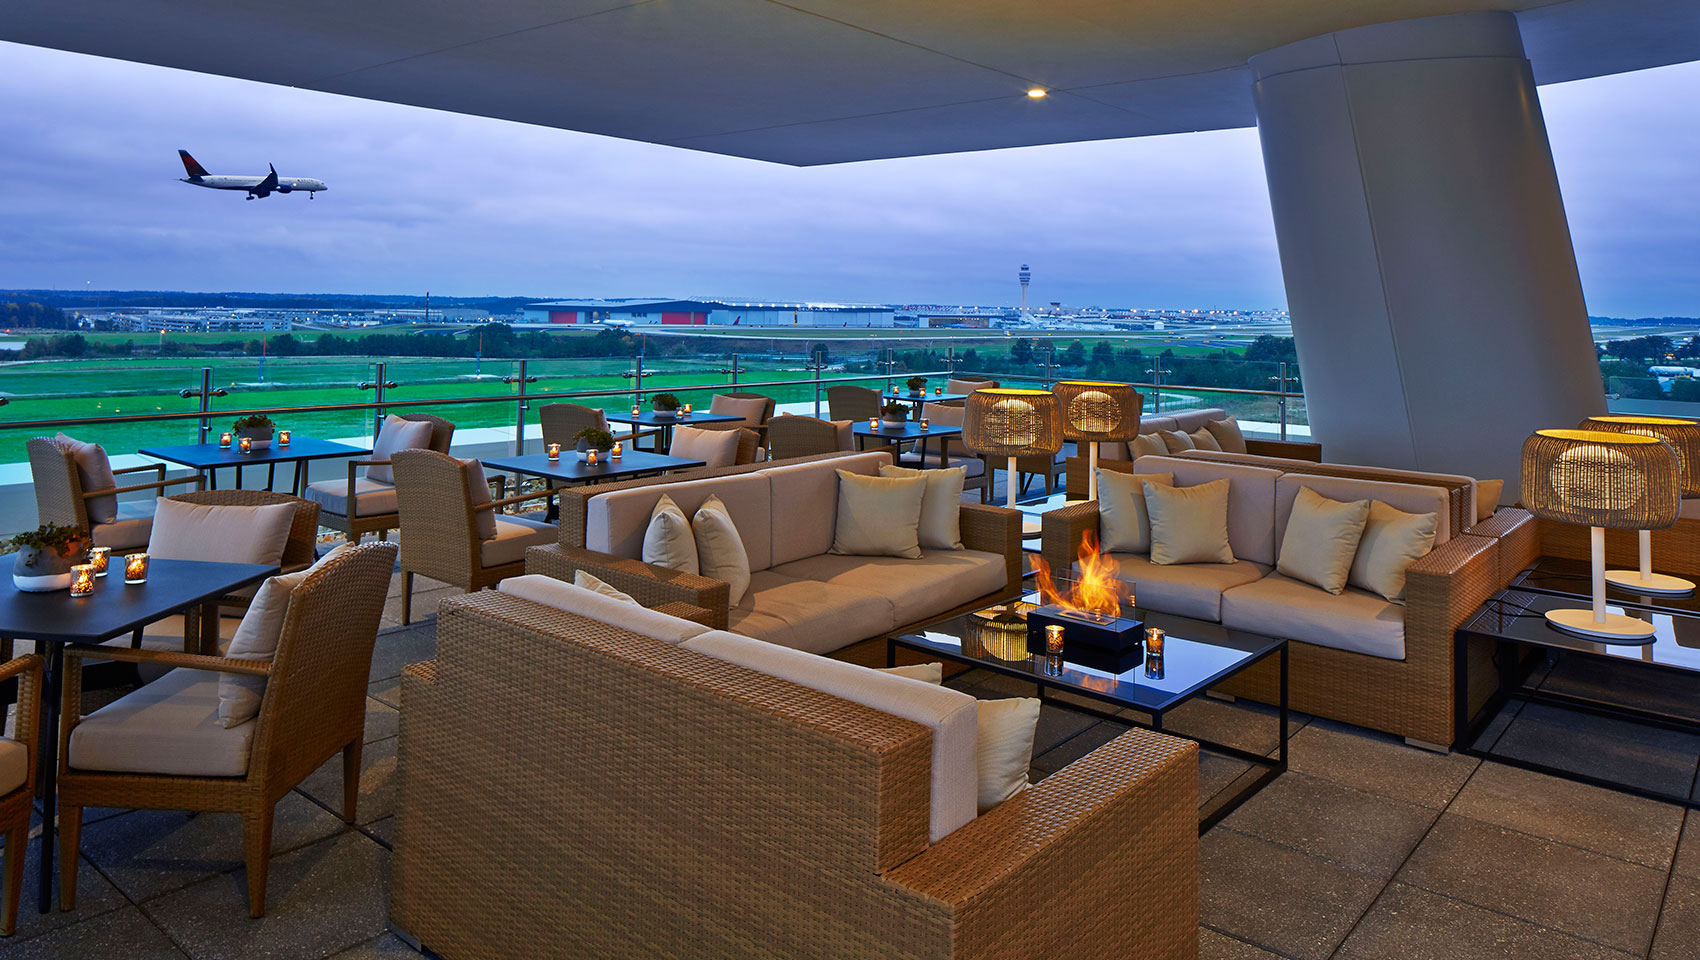 The Rooftop at Overland Atlanta, Airport hotel overlooking Atlanta’s International Airport with a plane on approach for arrival.